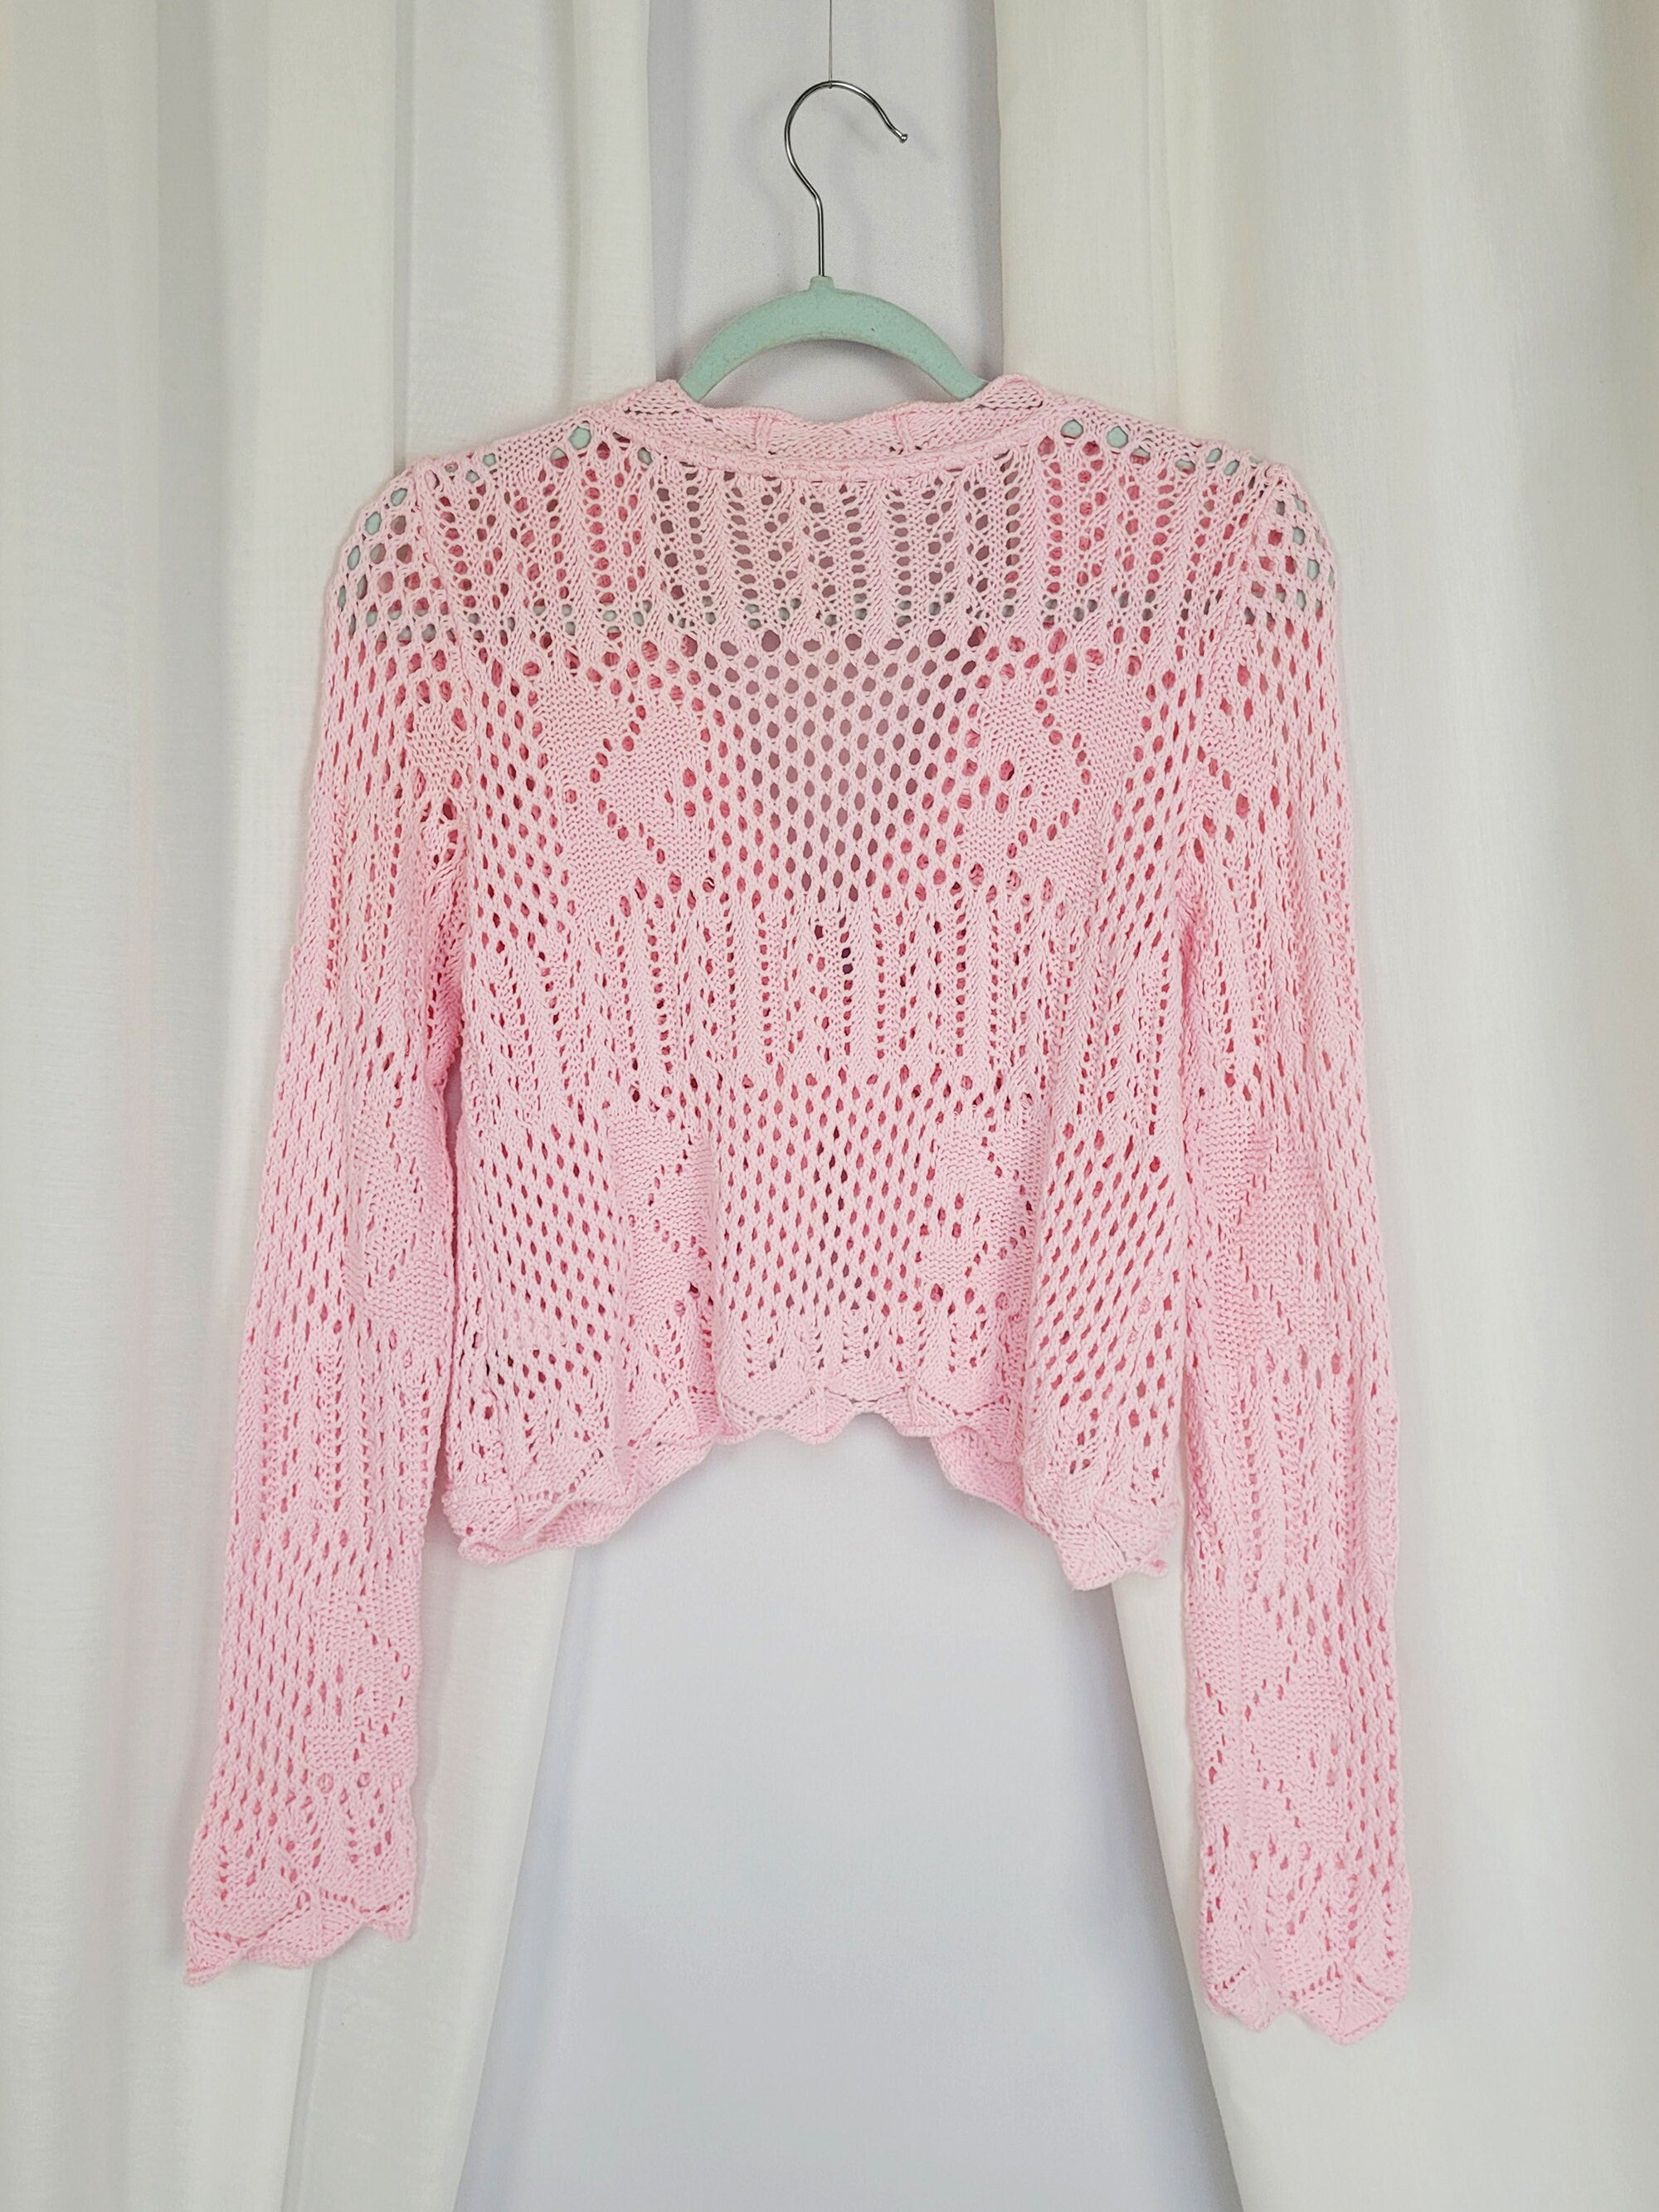 90s retro cable knit see through pink one button cardigan